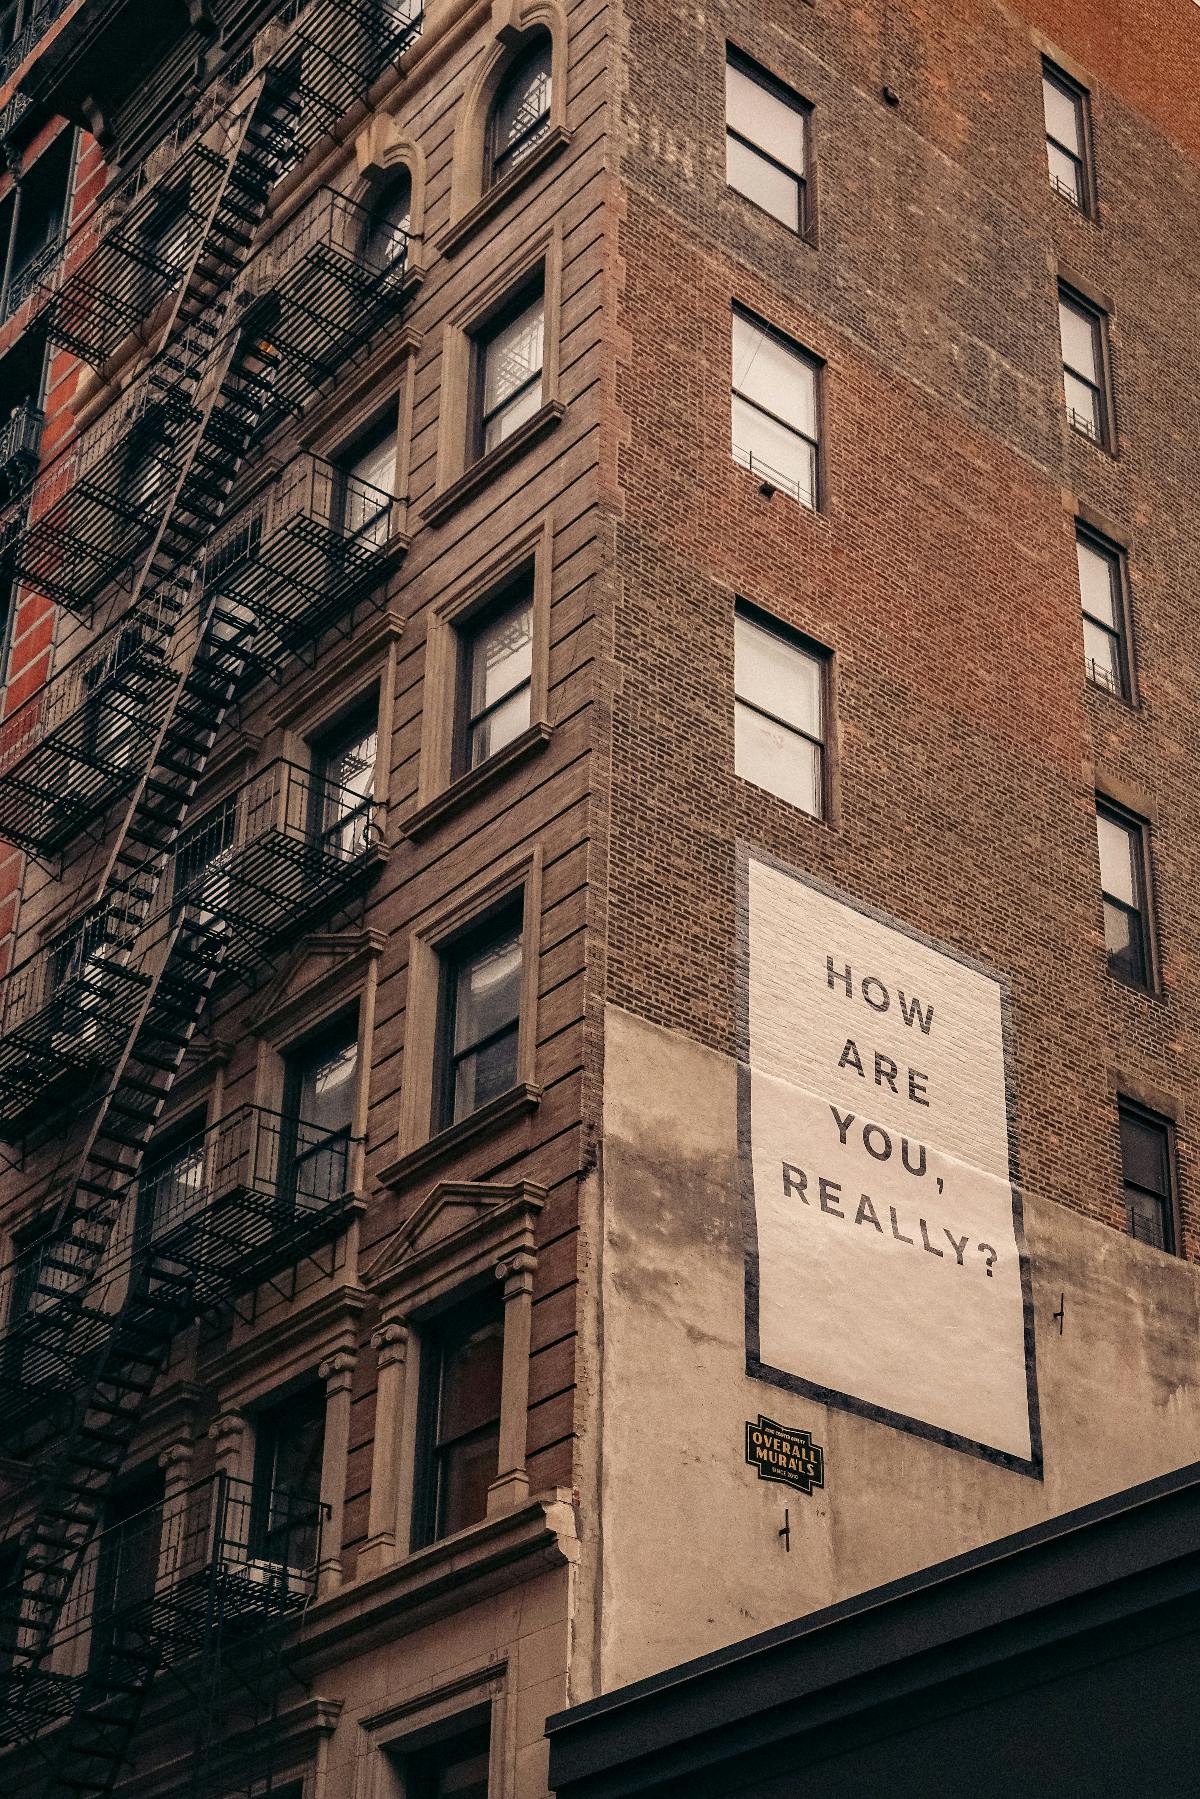 A brick building with fire escapes and sign on the side asking How Are You Really?